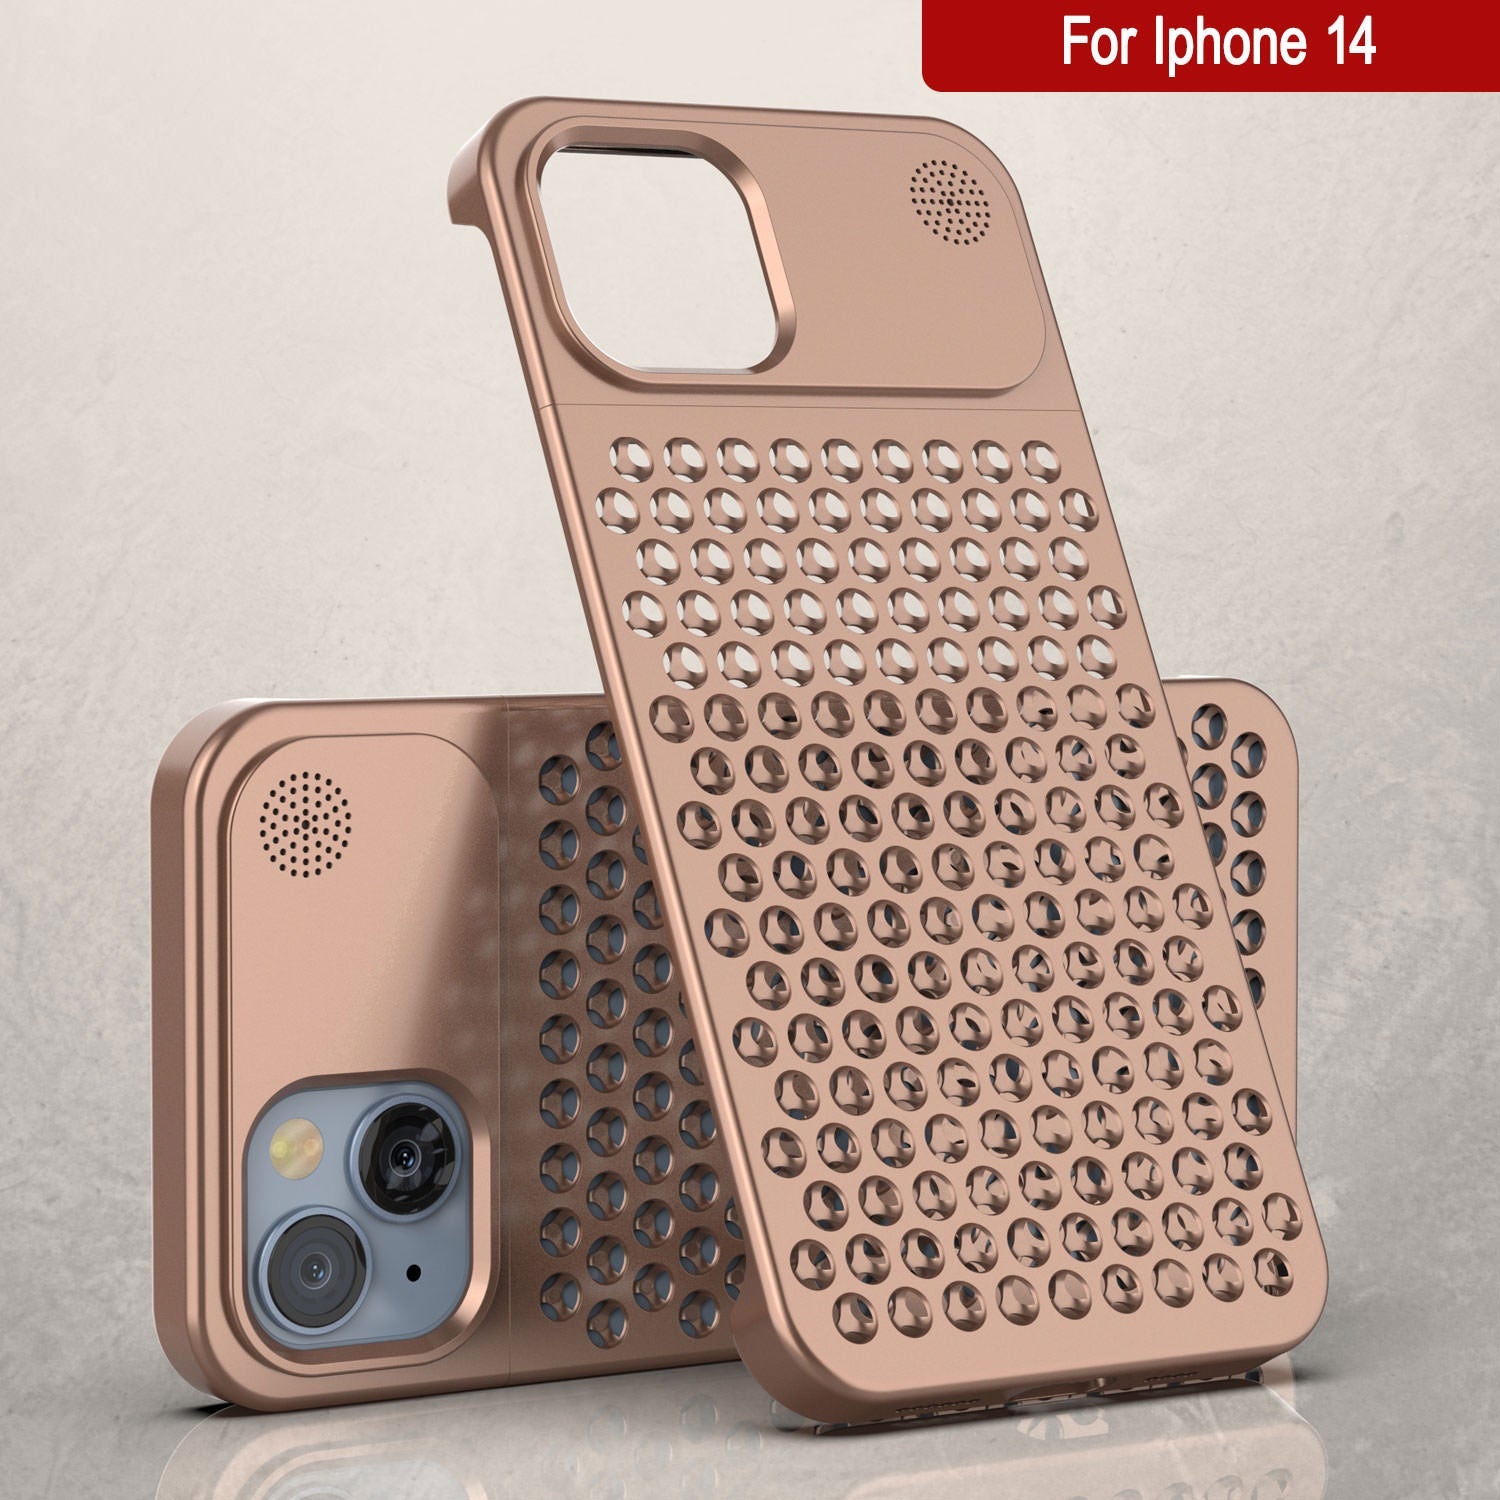 PunkCase for iPhone 14 Aluminum Alloy Case [Fortifier Extreme Series] Ultra Durable Cover [Bronze]